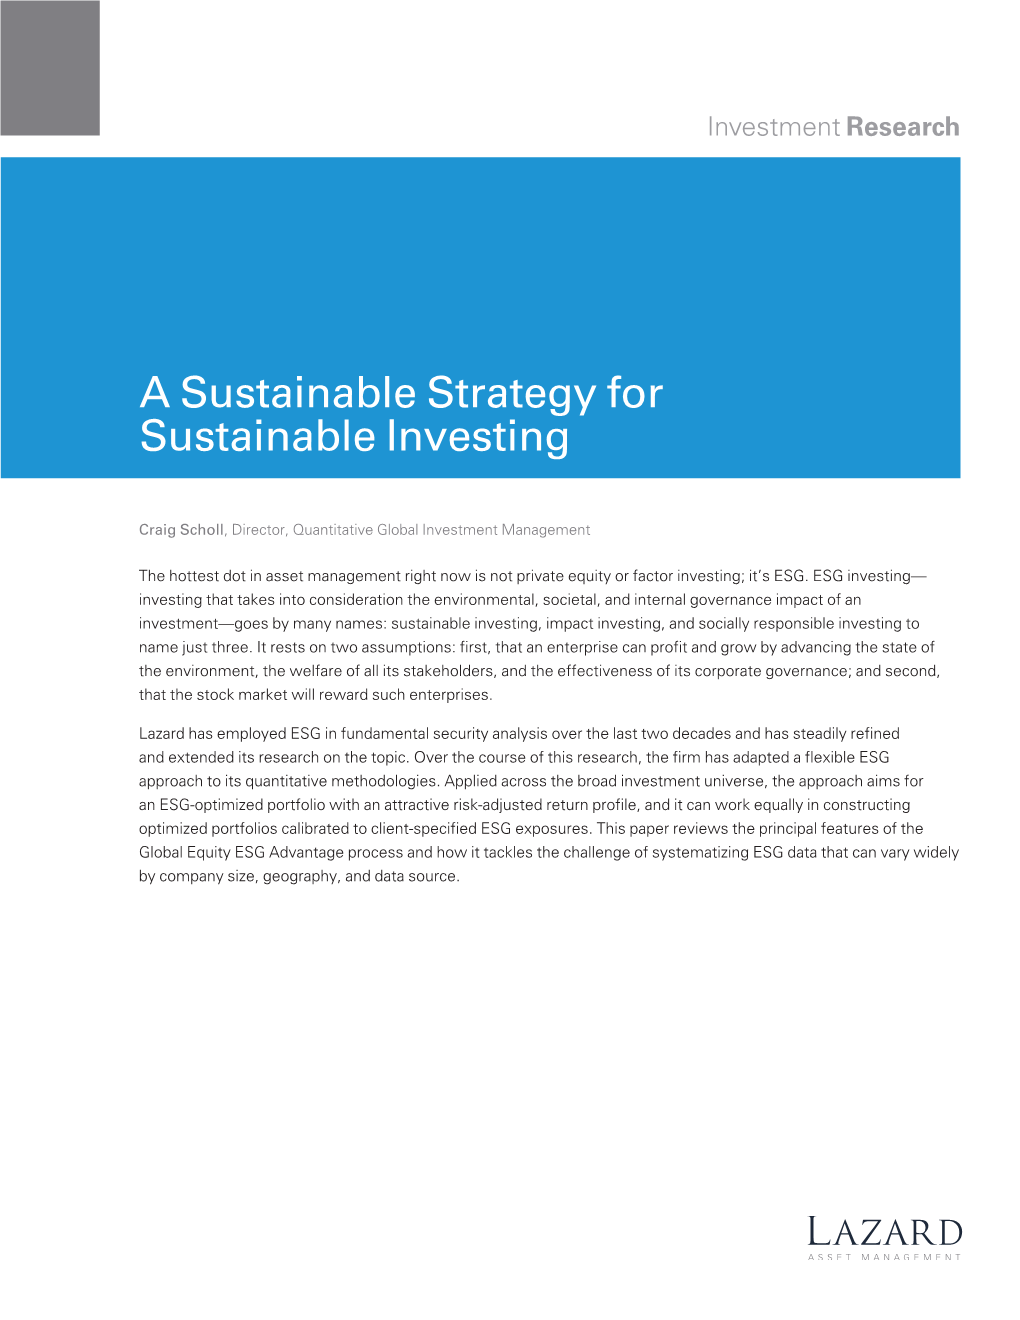 A Sustainable Strategy for Sustainable Investing